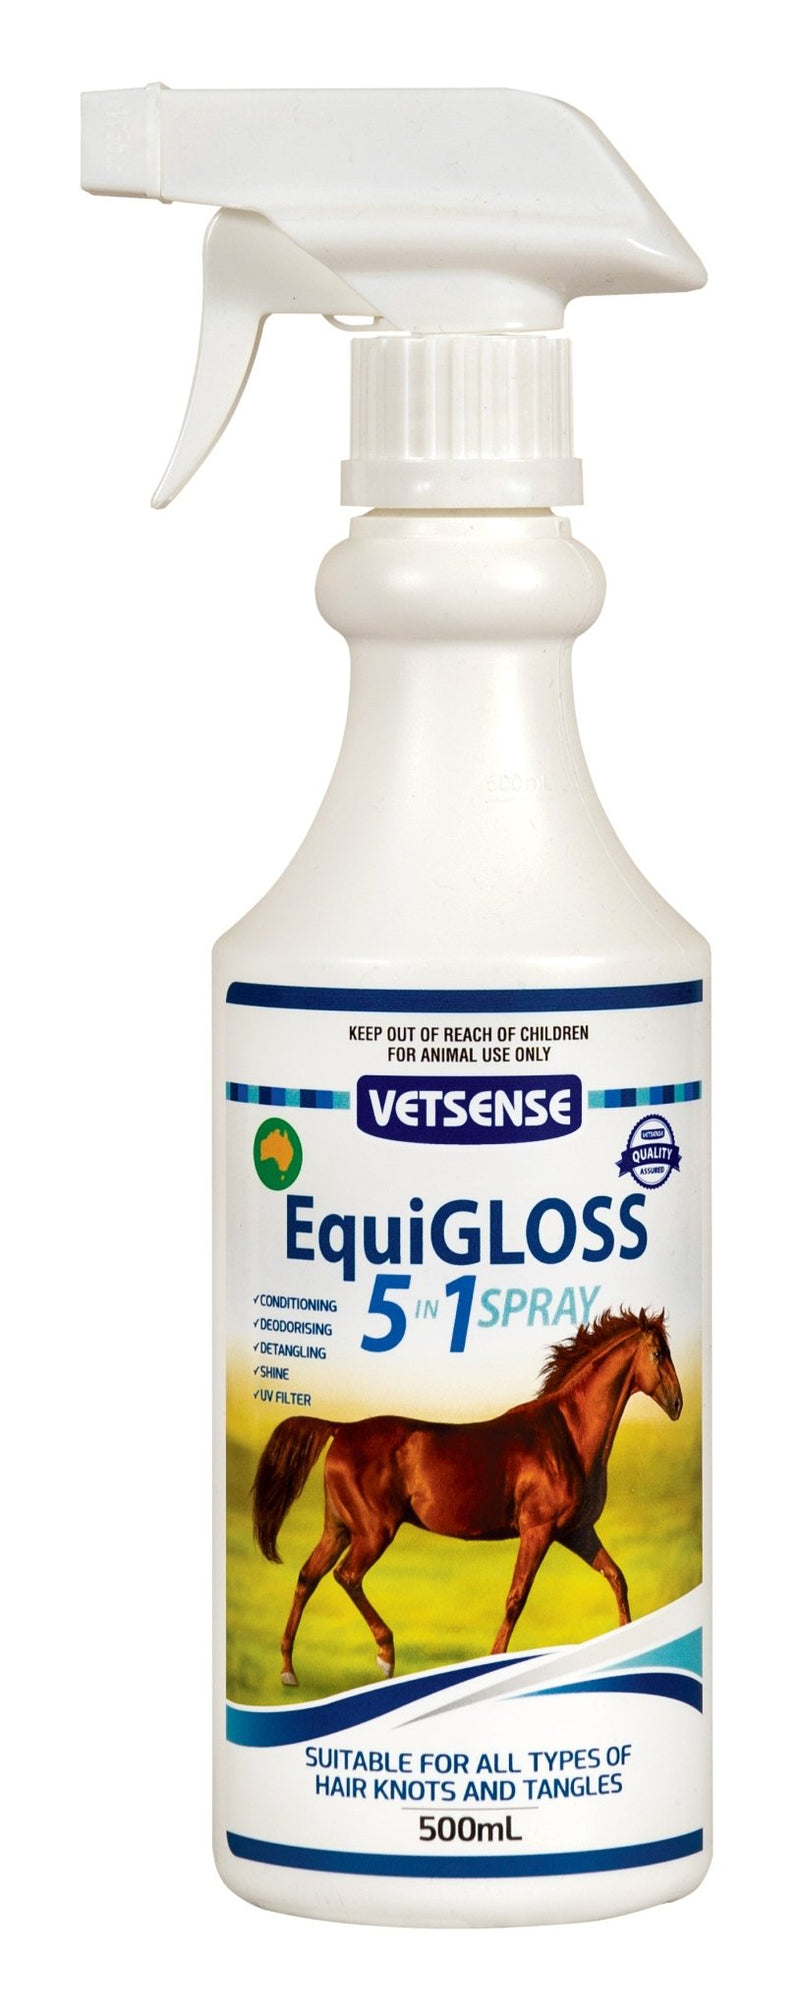 Vetsense EquiGloss 5 in 1 Spray available to purchase online from Saddleworld Dural.